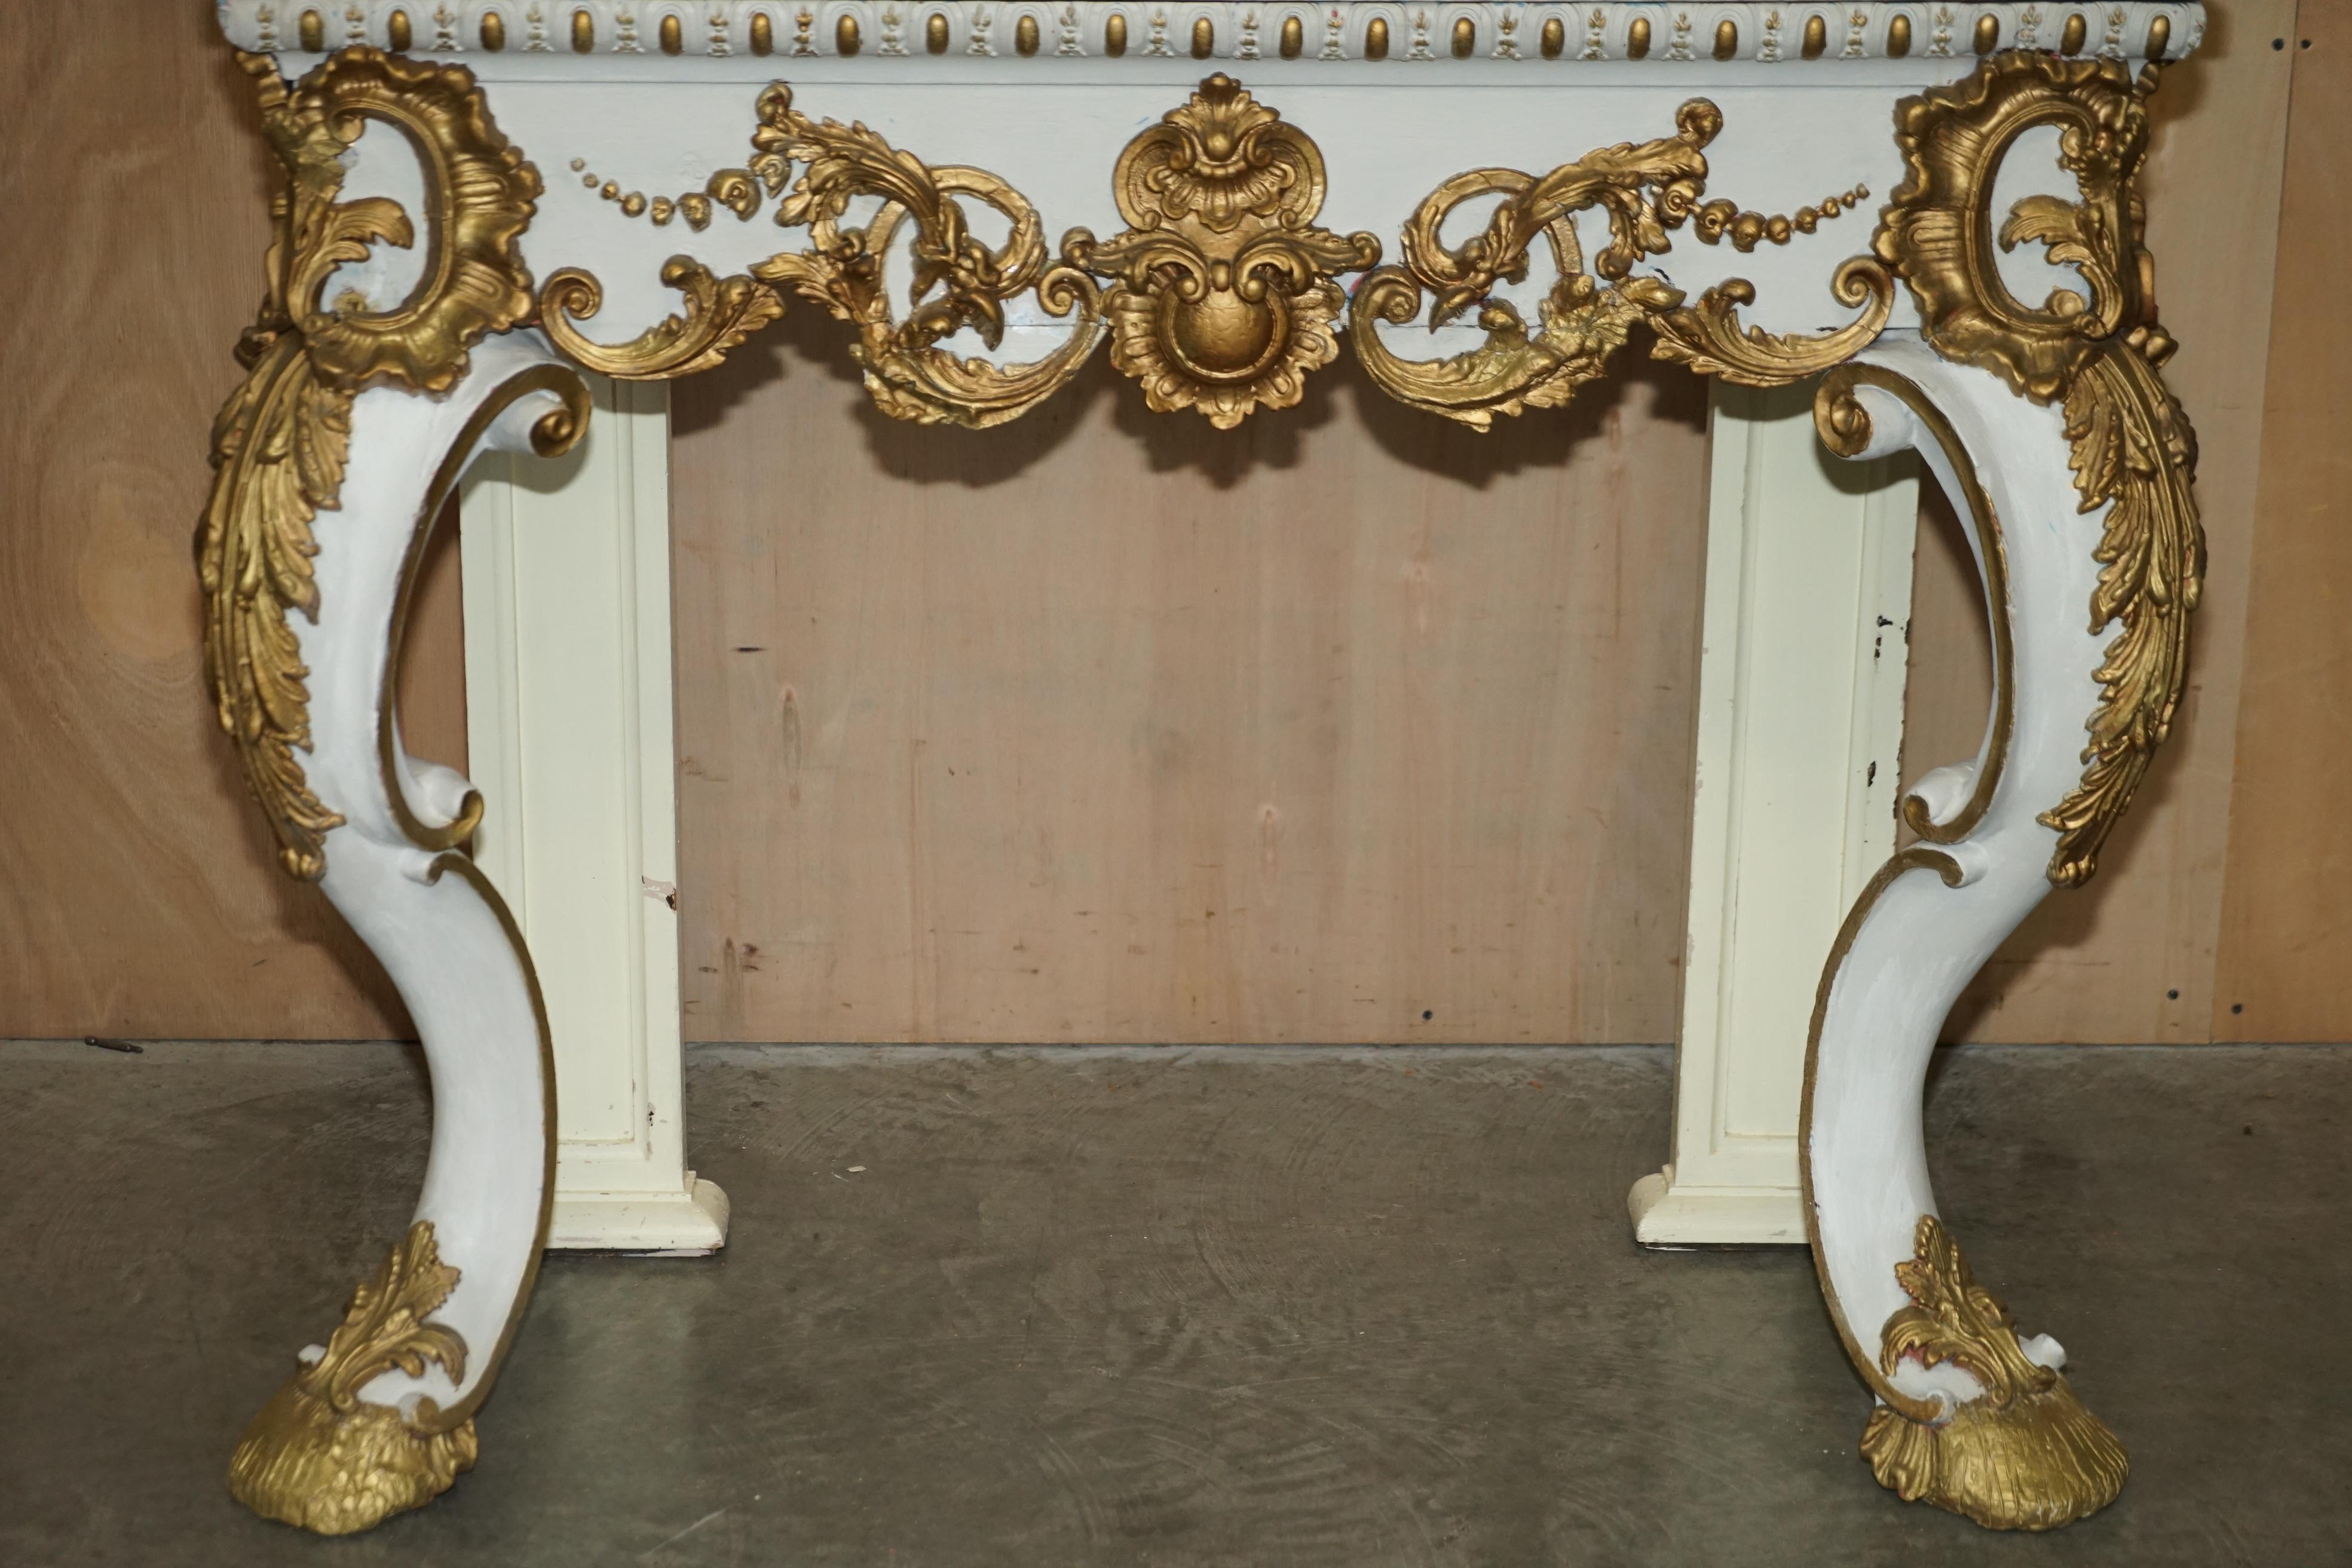 Italian ANTIQUE ITALIAN HAND CARVED GiLTWOOD & MARBLE CONSOLE TABLE CIRCA 1860 VENICE For Sale